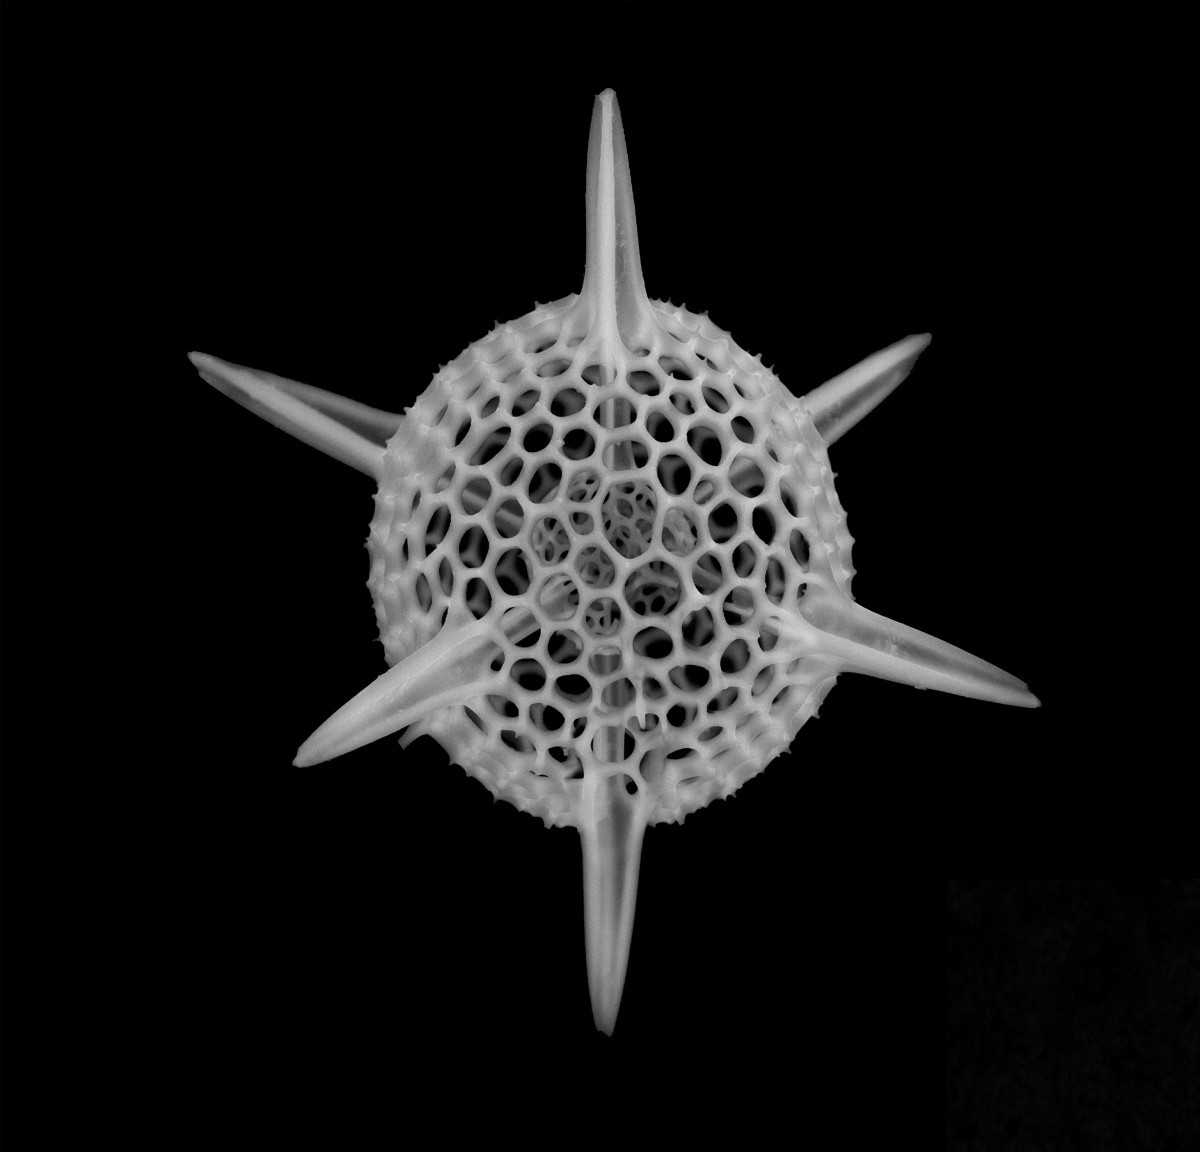 Microscopic image of a hollow sphere with six radiating points.